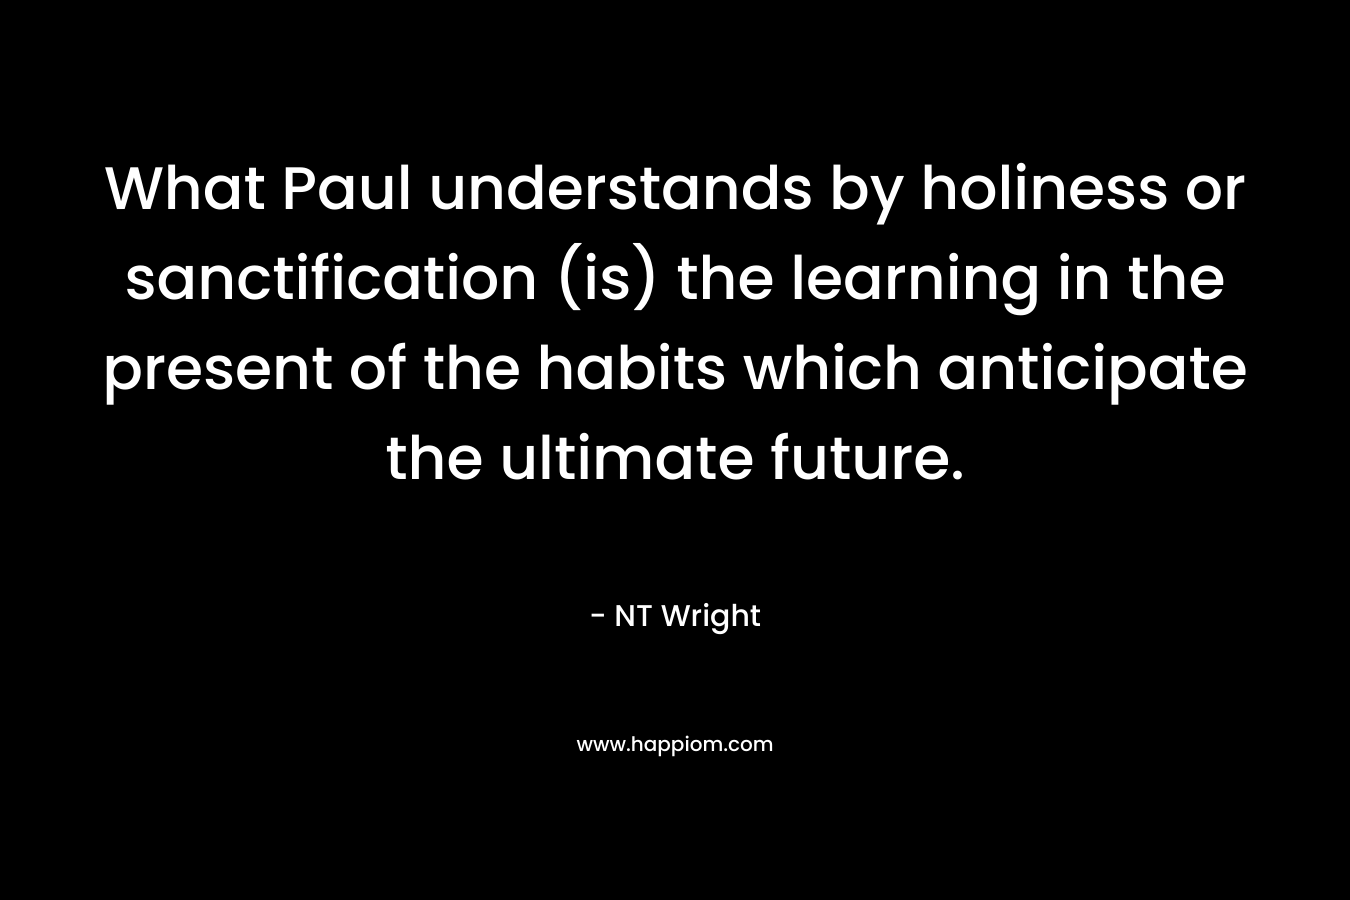 What Paul understands by holiness or sanctification (is) the learning in the present of the habits which anticipate the ultimate future. – NT Wright